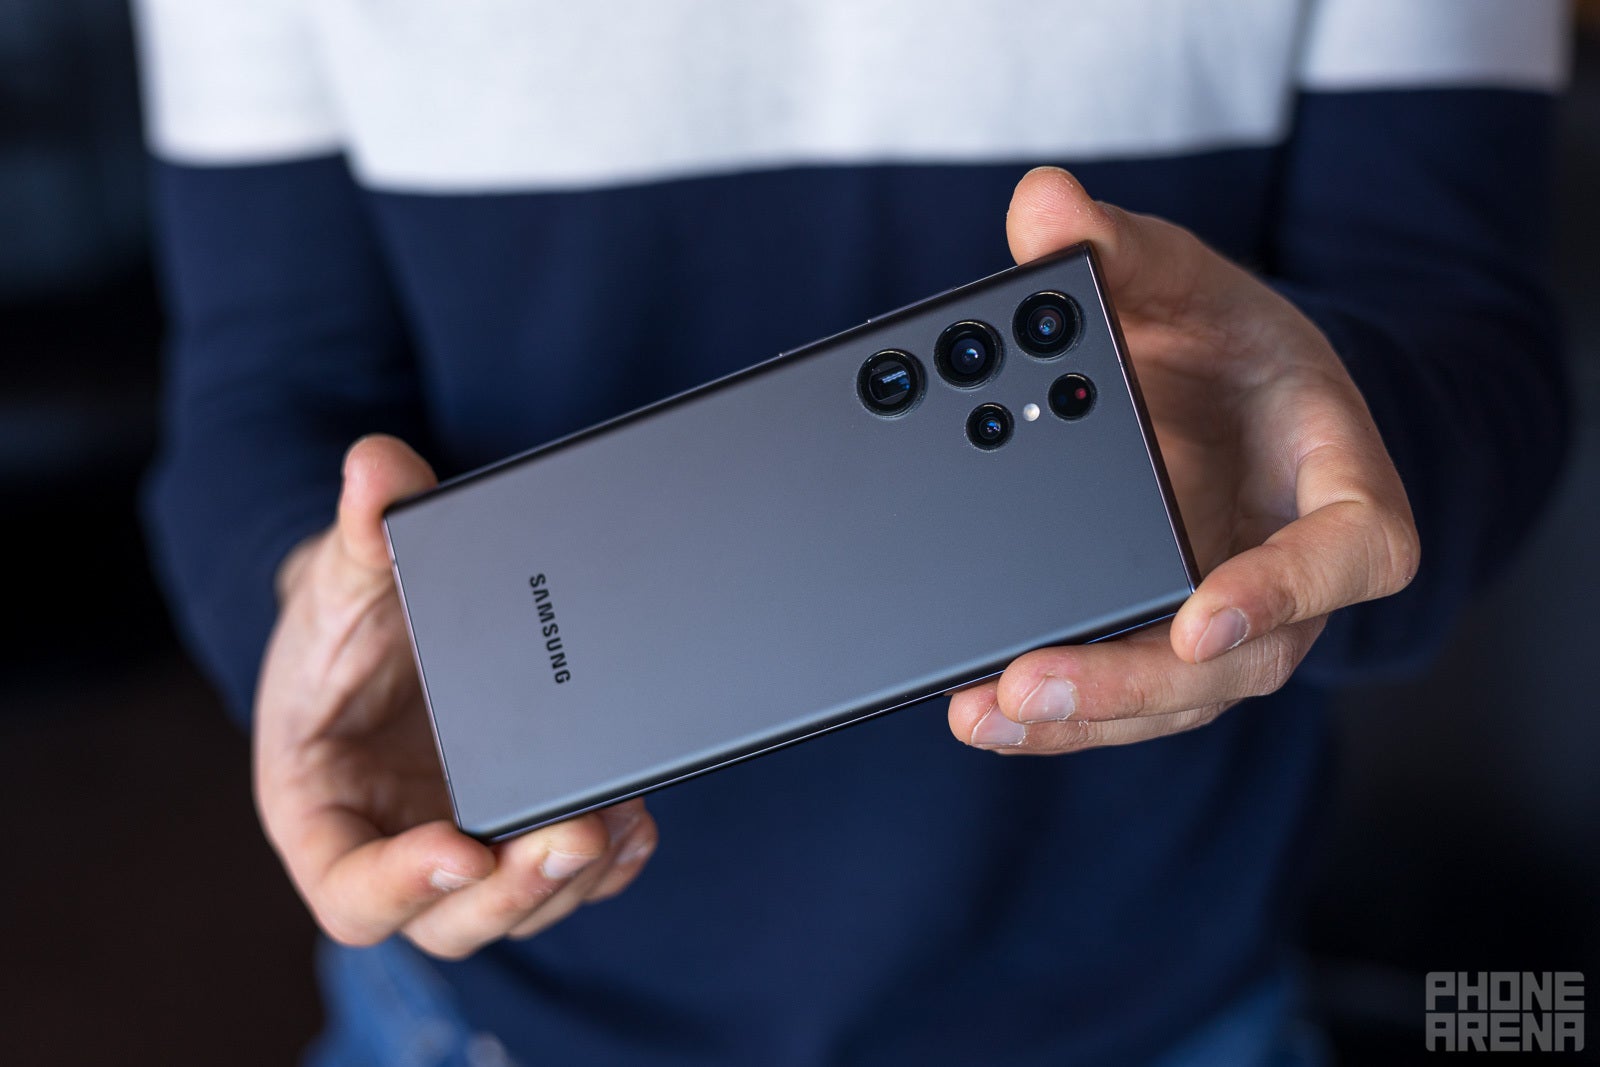 PhoneArena 2023 Awards: These are the best phones of the year